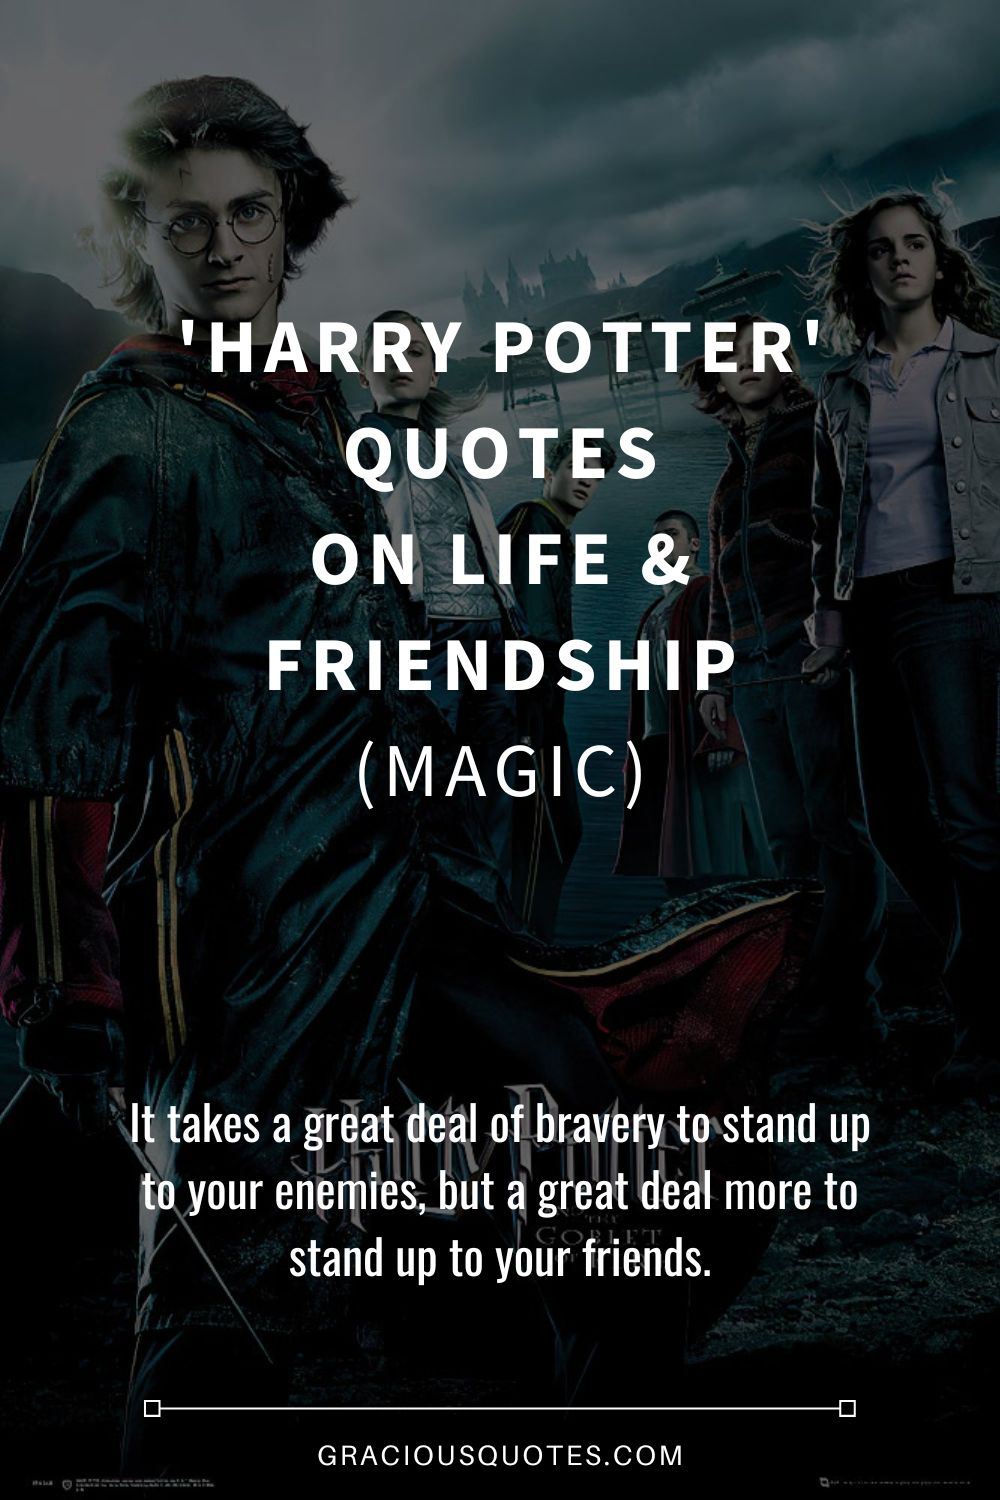 100 'Harry Potter' Quotes on Life & Friendship (WIZARD)